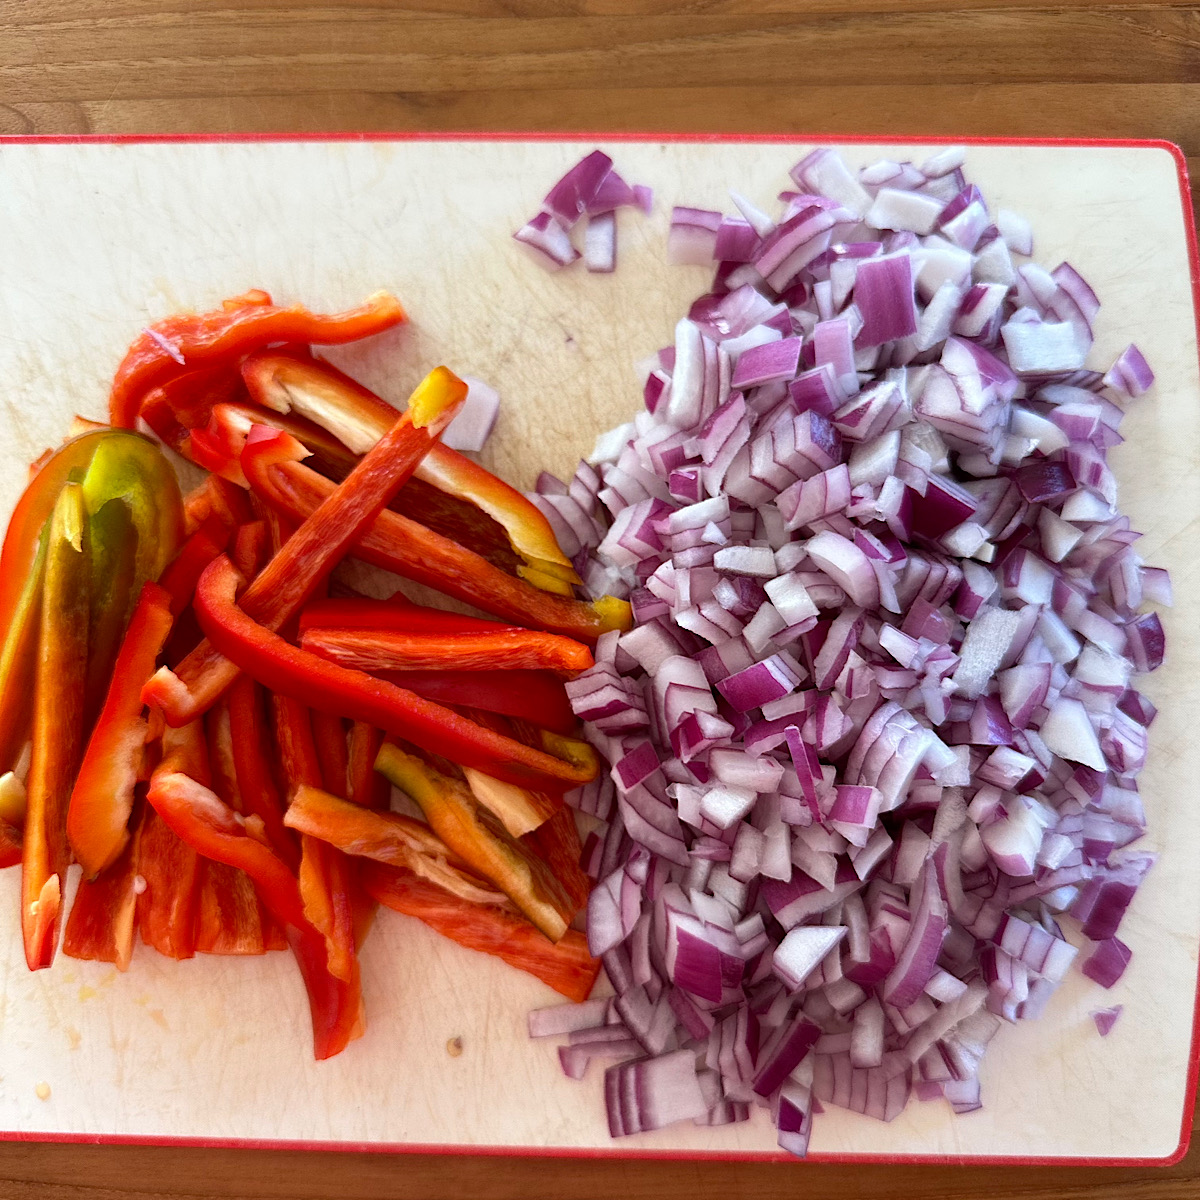 Chopped purple onion and sliced red bell pepper on cutting board.